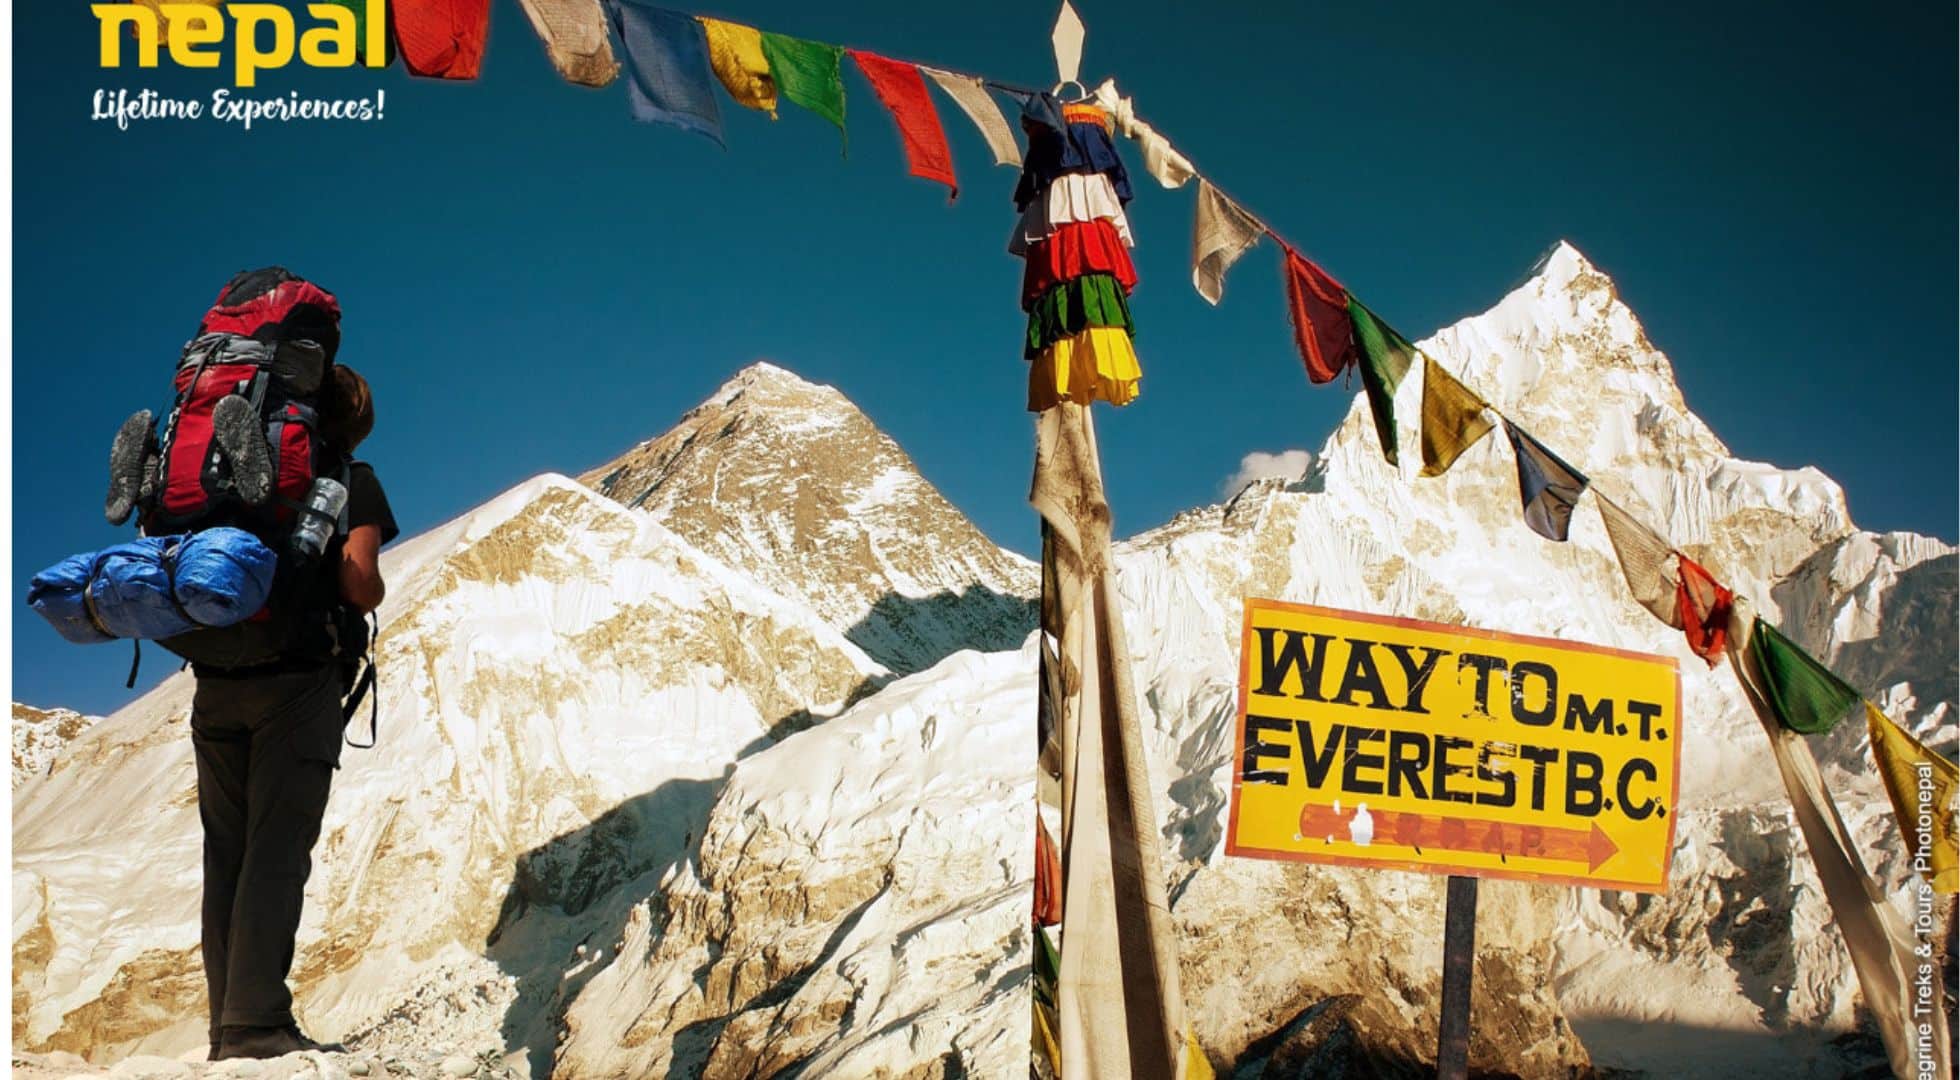 Nepal Travel: Best Places Visit And Things in 2022 Travel to Nepal: Everest Base Camp Trek